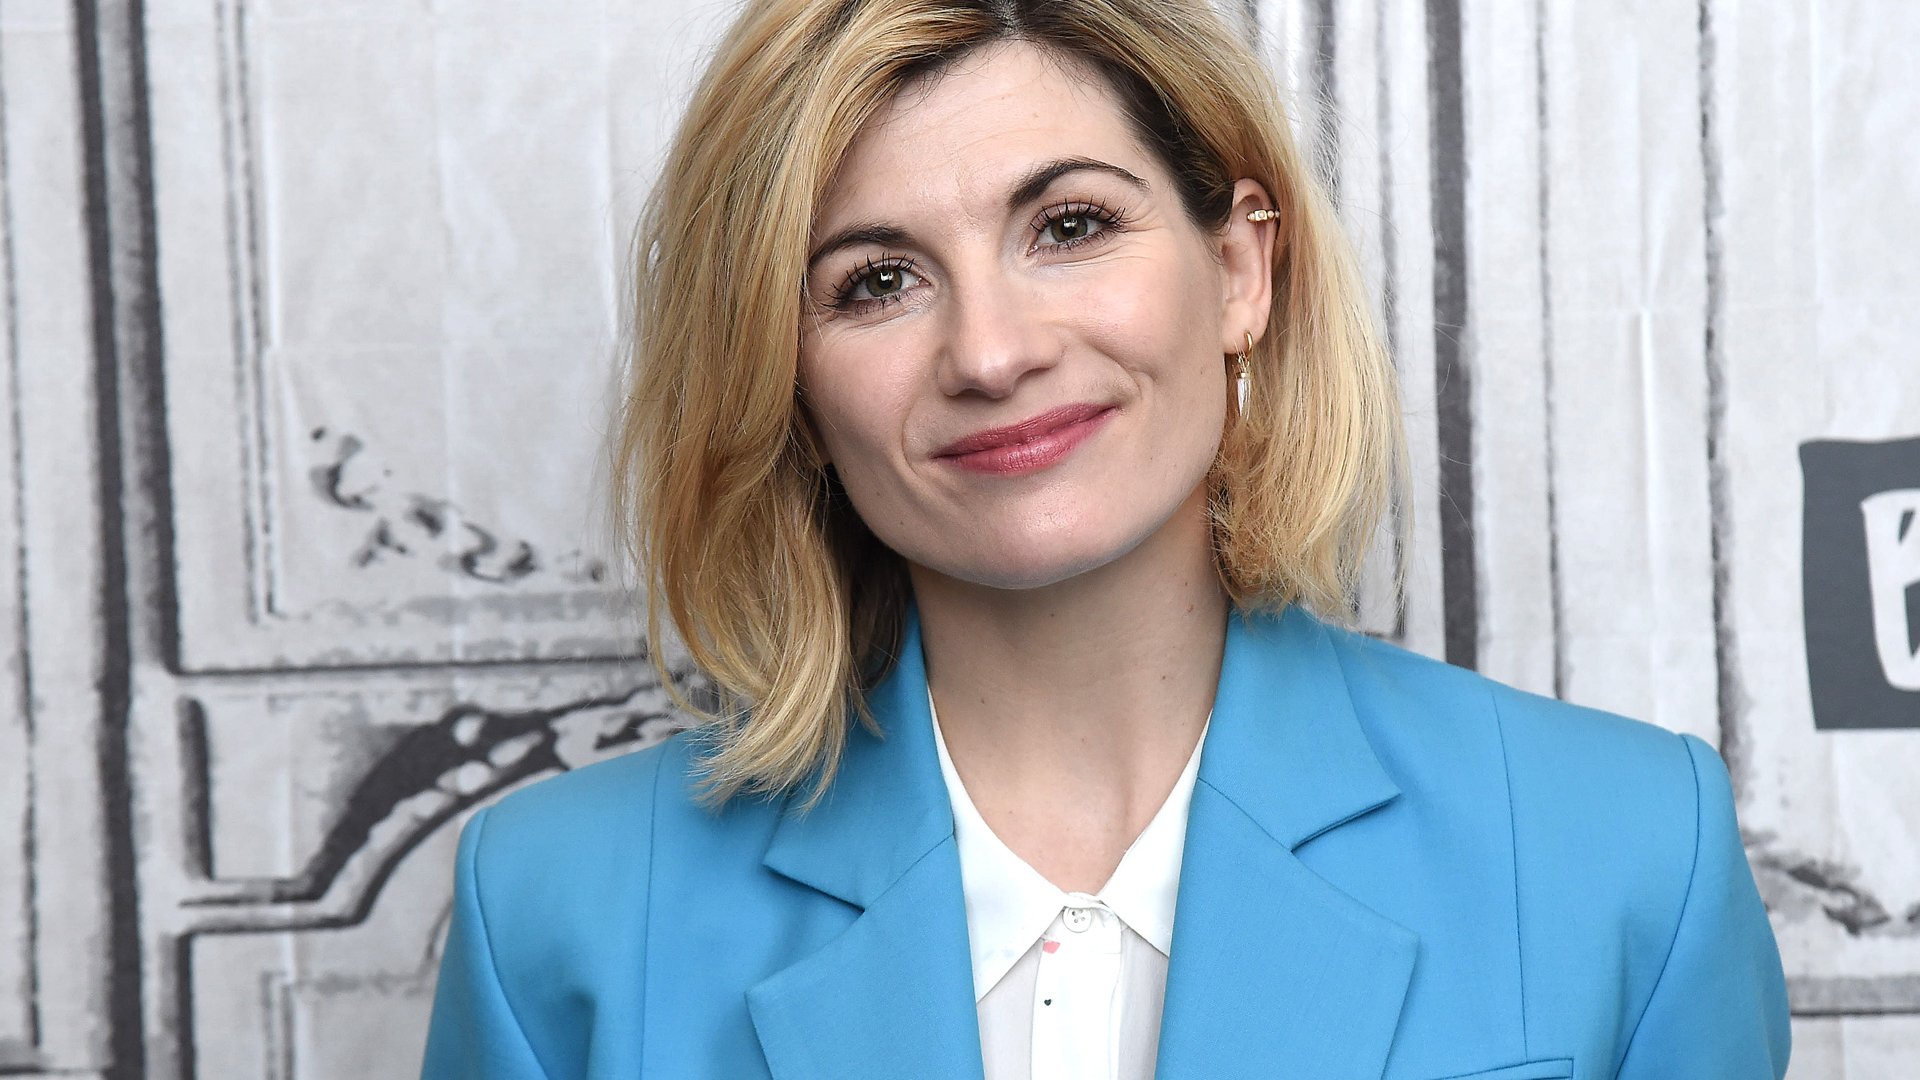 Jodie Whittaker visits the Build Series to discuss Season 12 of the BBC America series “Doctor Who” at Build Studio on January 06, 2020 in New York City.